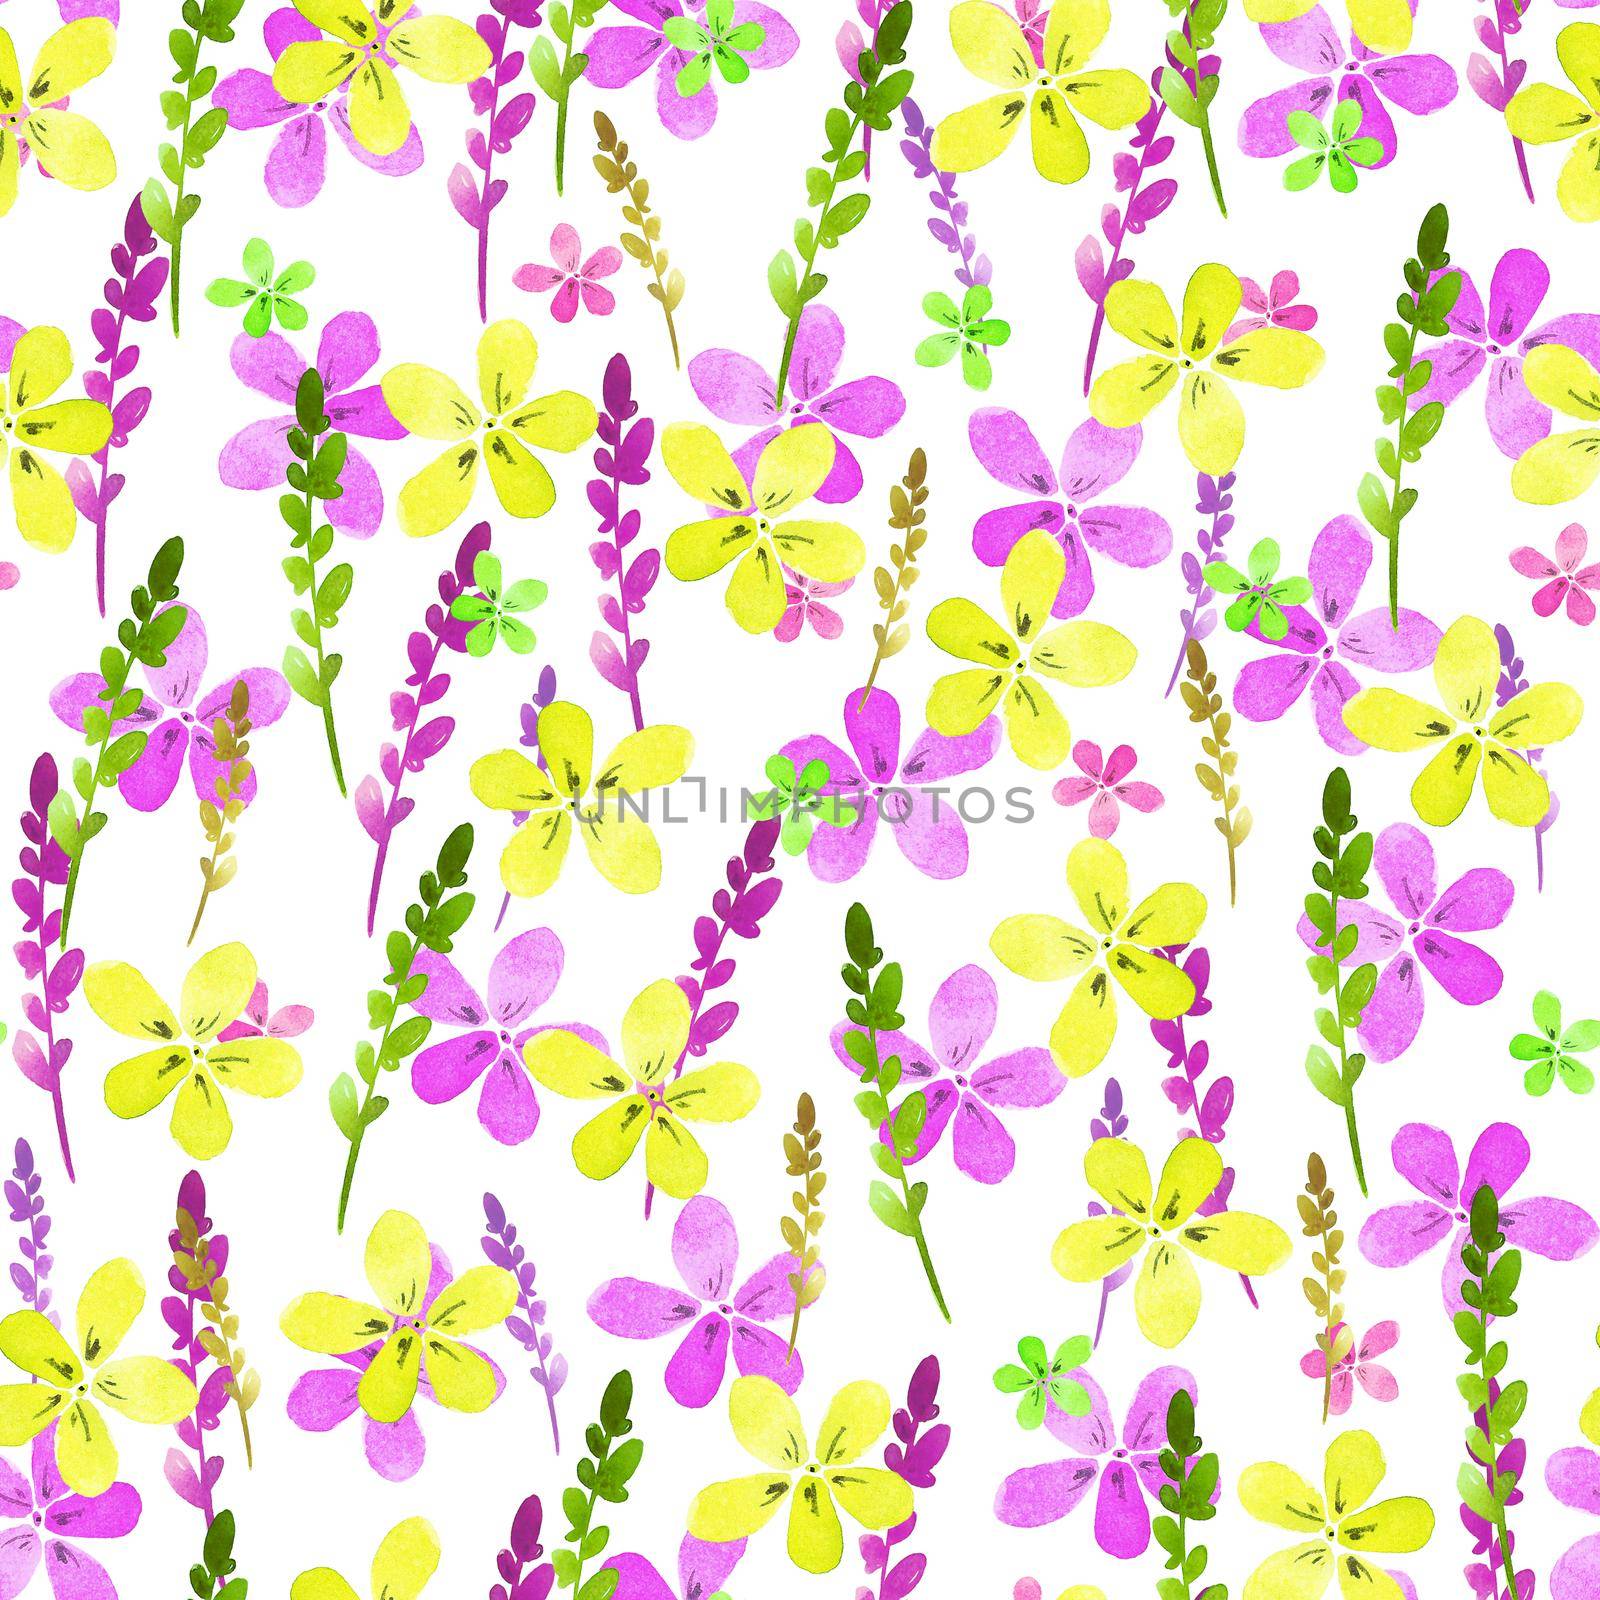 Seamless floral pattern with watercolor yellow pink flowers and leaves in vintage style on white background. . Hand made. Ornate for textile, fabric, wallpaper. Nature illustration. Painting elements. by DesignAB